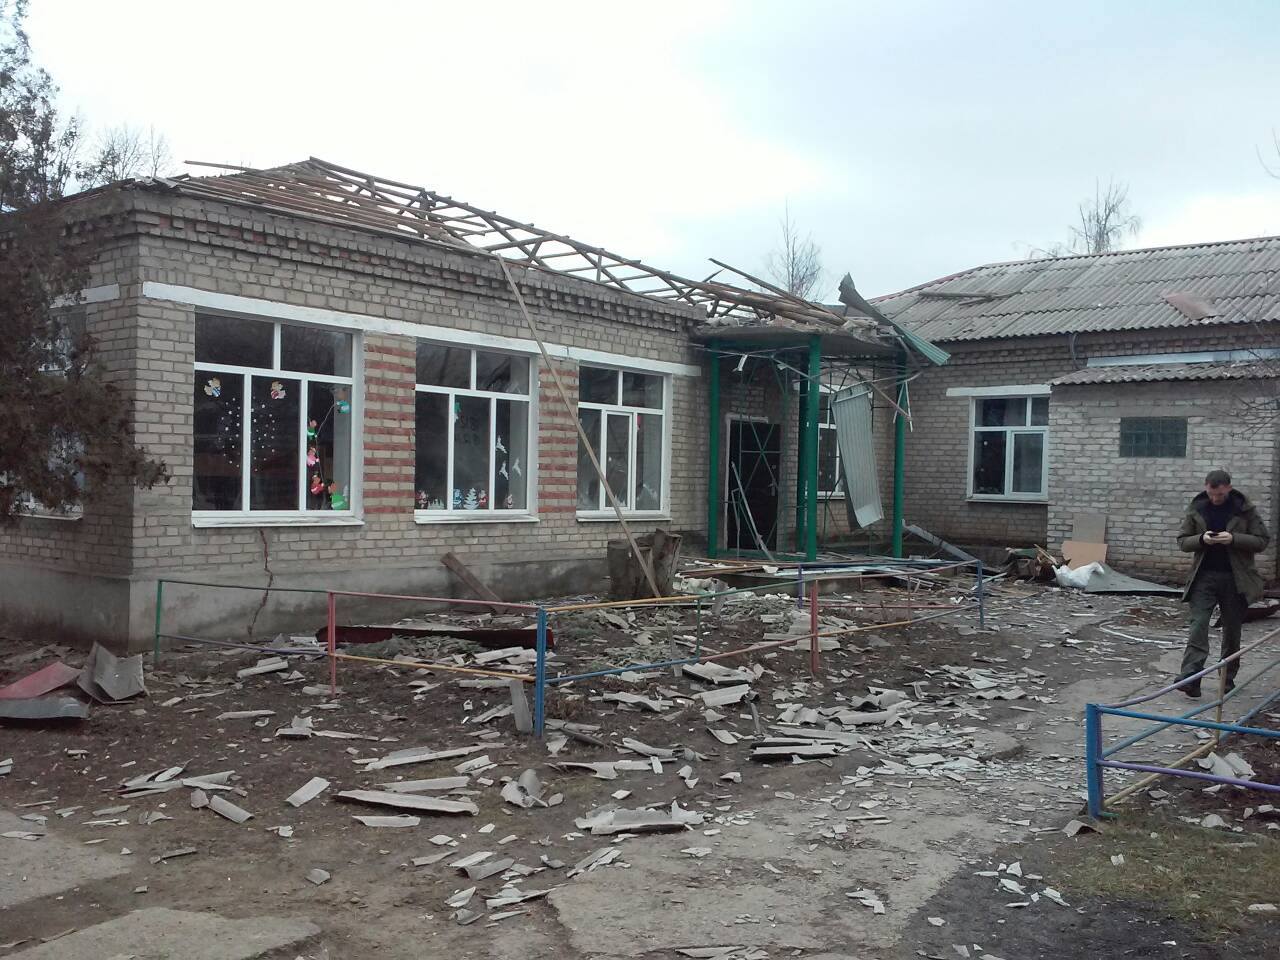 Another ceasefire begins in Donbas after pullout of Russian observers followed by escalation ~~